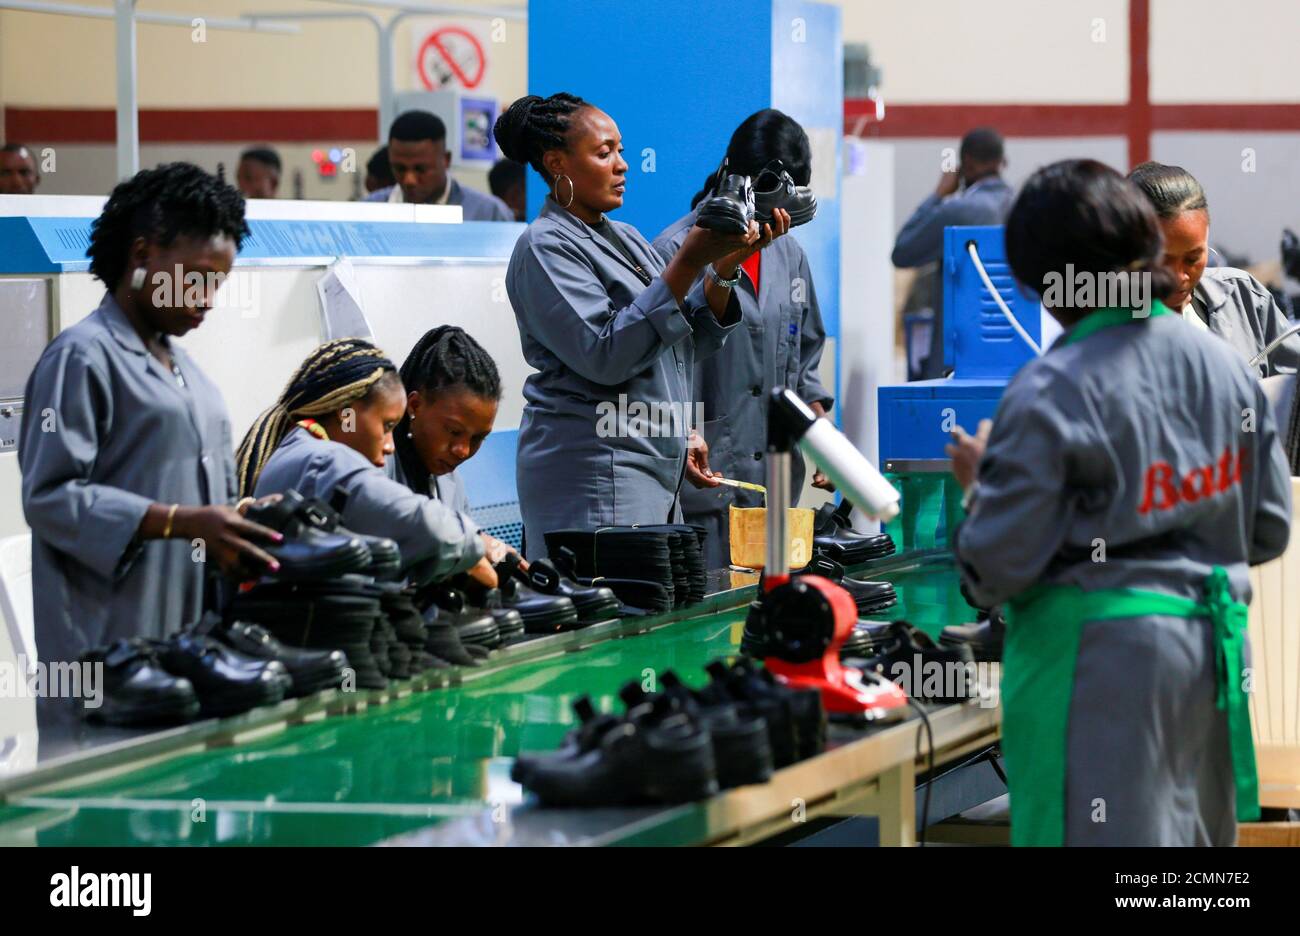 Women workers inspect shoes at a Bata shoe factory in Abuja, Nigeria January 13, 2020. Picture taken January 13, 2020. REUTERS/Afolabi Sotunde Stock Photo